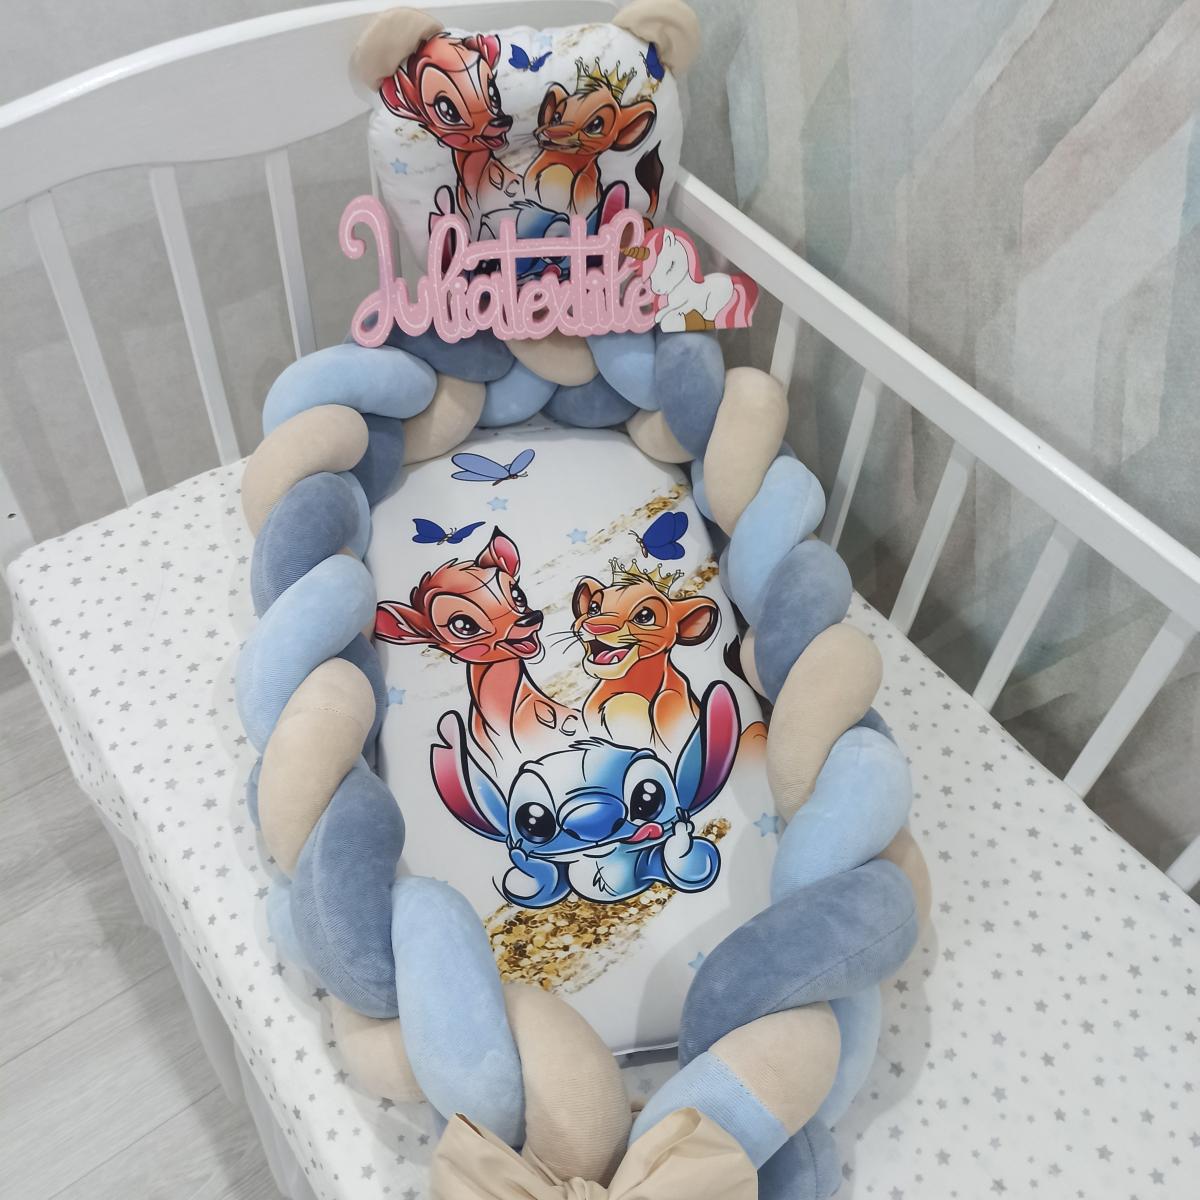 Childhood Dreams with Disney Characters: Braided Insert for Babies